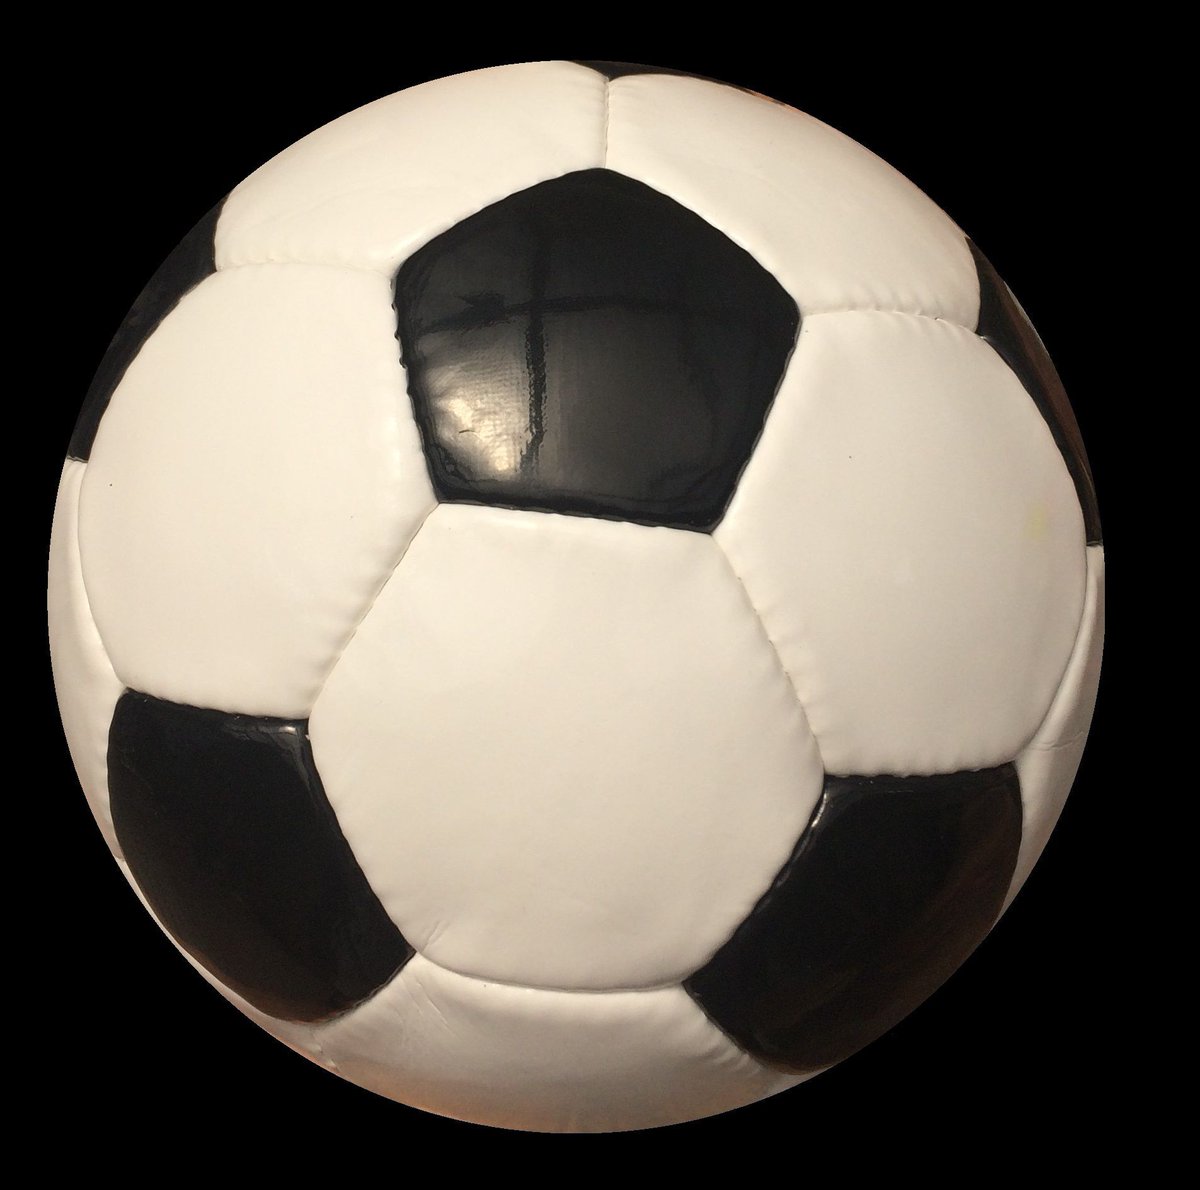 The simple reason soccer balls are traditionally Black and White...

It was so people could see the ball easier on their black and white televisions. 

Our kids will never understand.

#blackandwhite #oldschool #customsoccerballs #designyourown #onlinedesigner